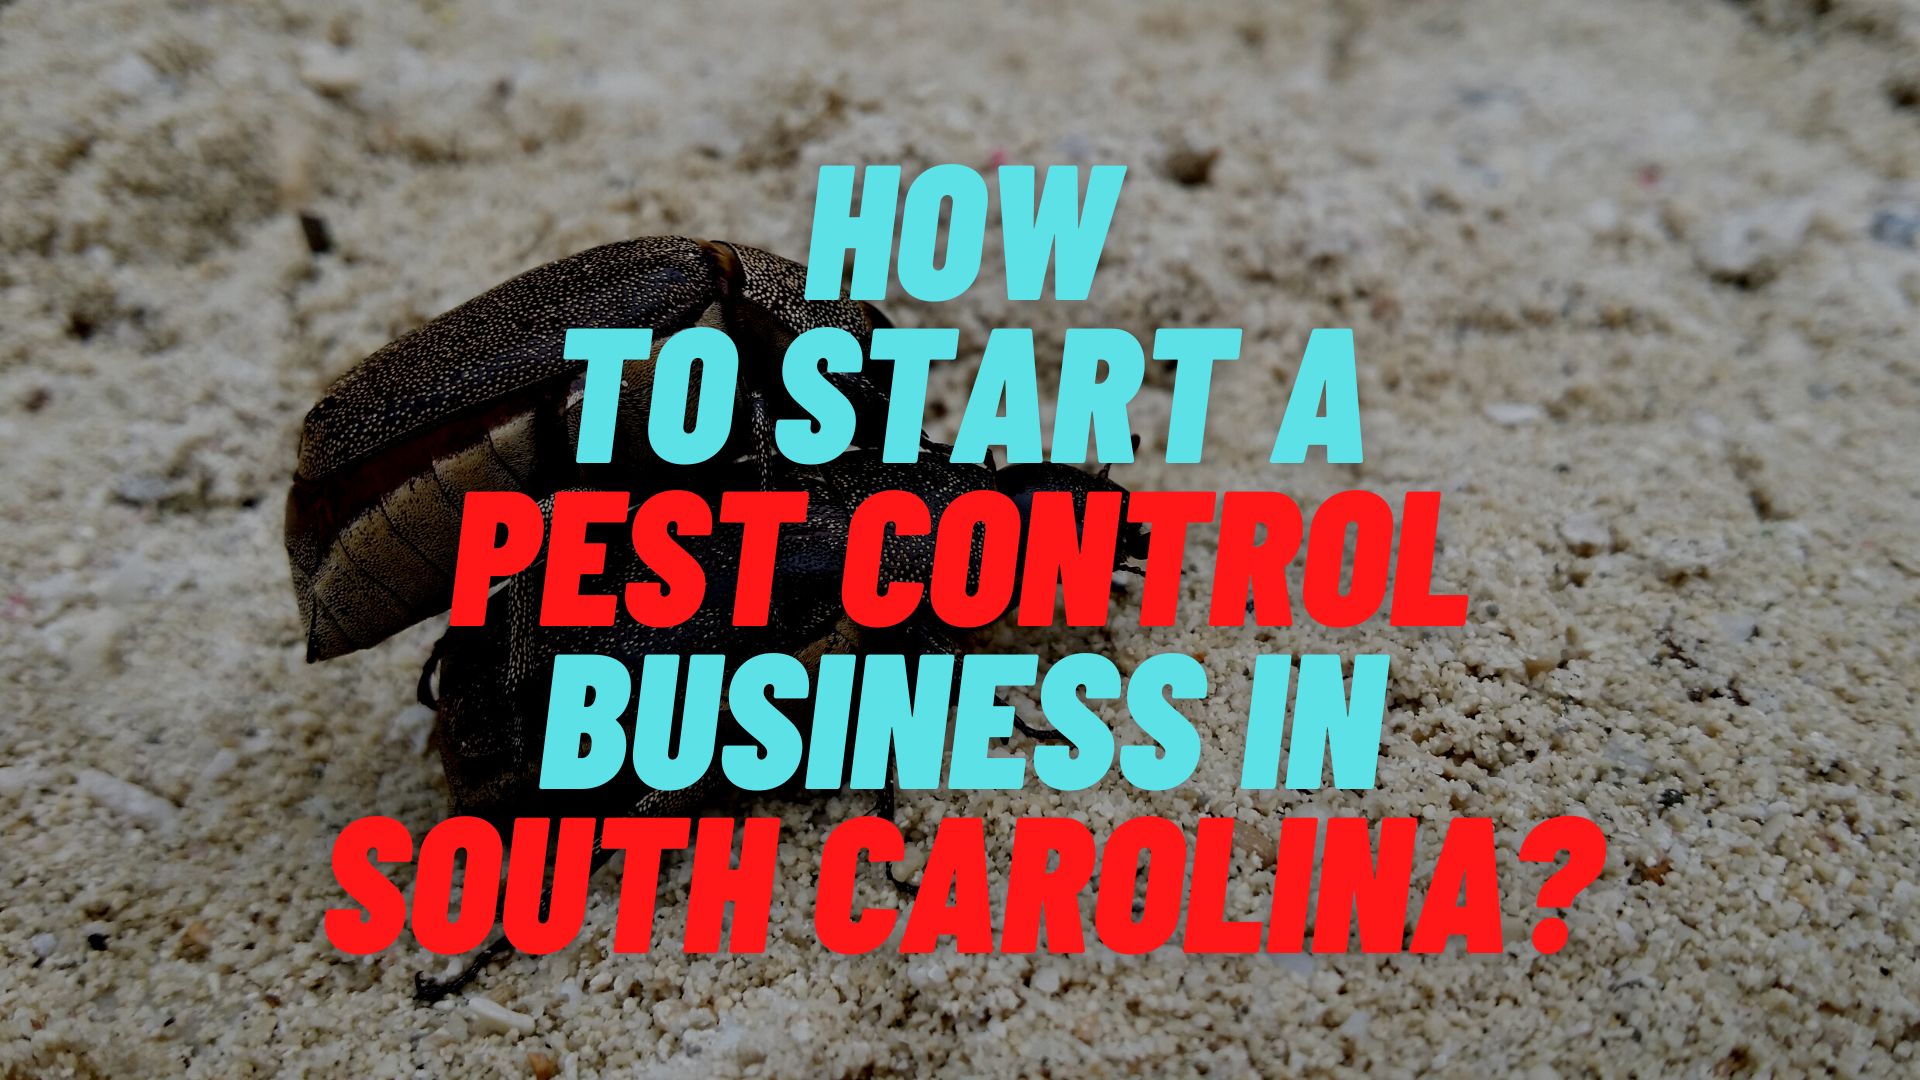 How to start a pest control business in South Carolina?